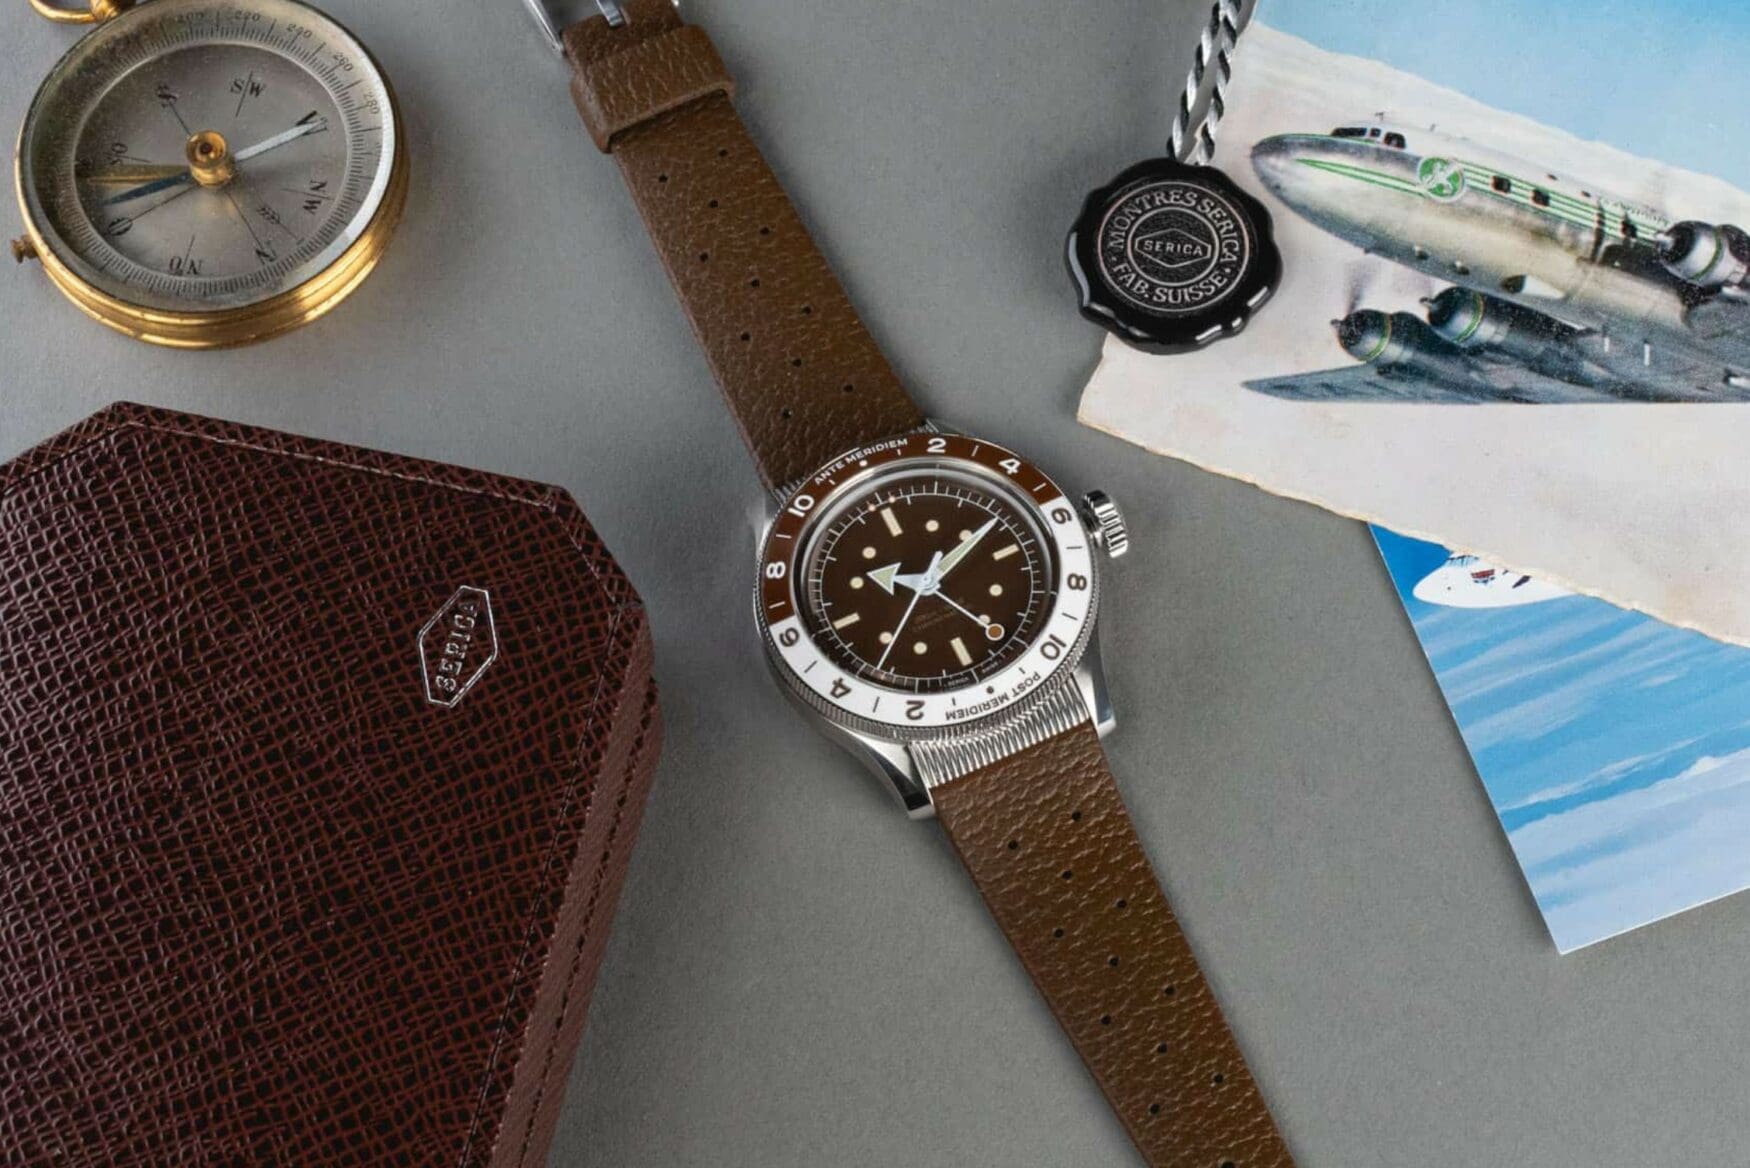 Serica replay the greats with the deliciously chocolatey Ref. 8315 Travel Chronometer